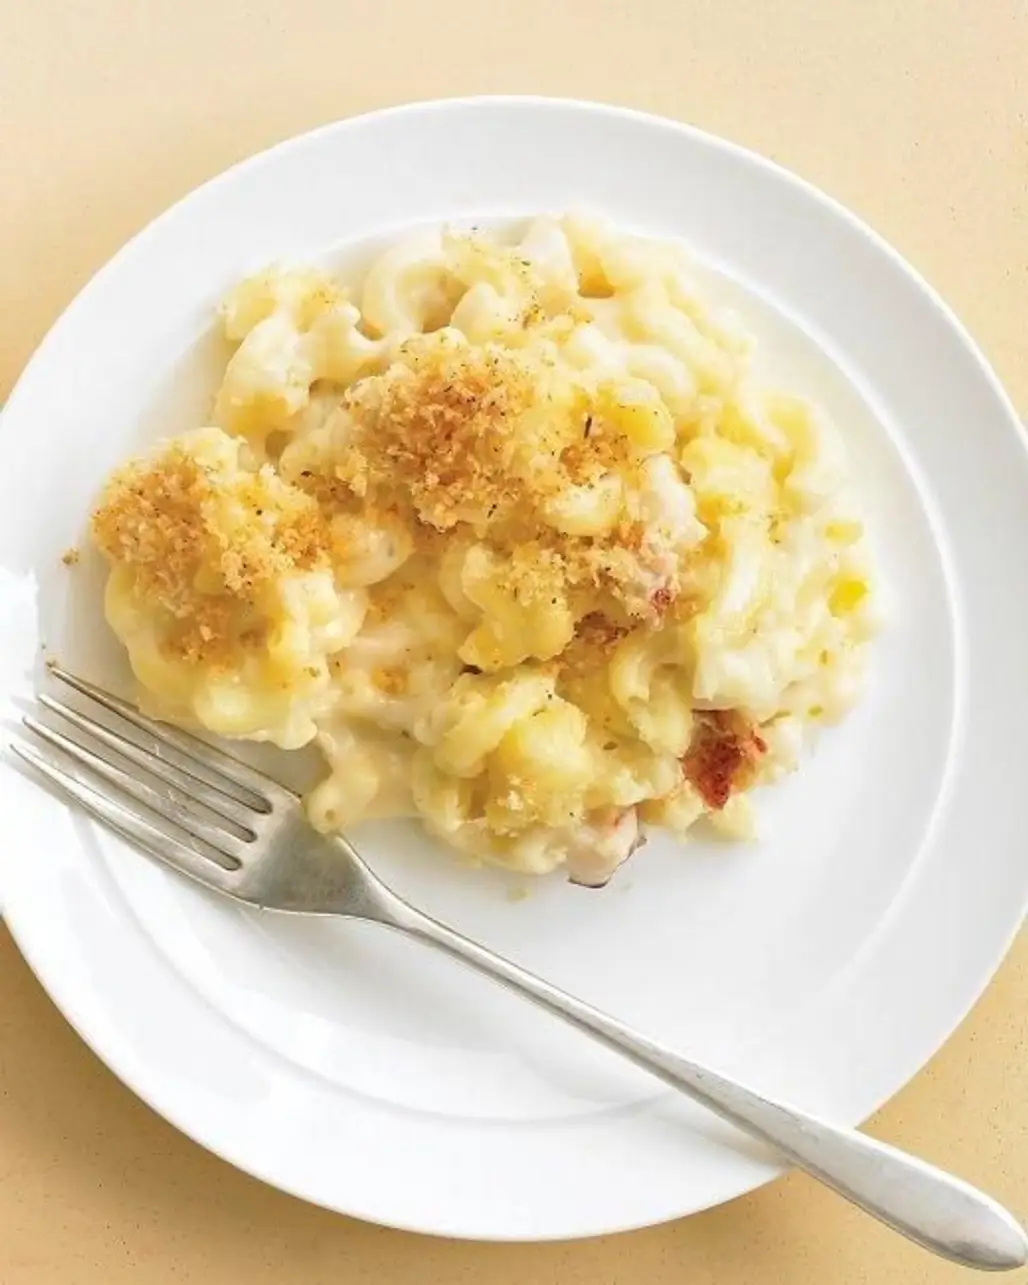 Emeril's Seafood Mac and Cheese